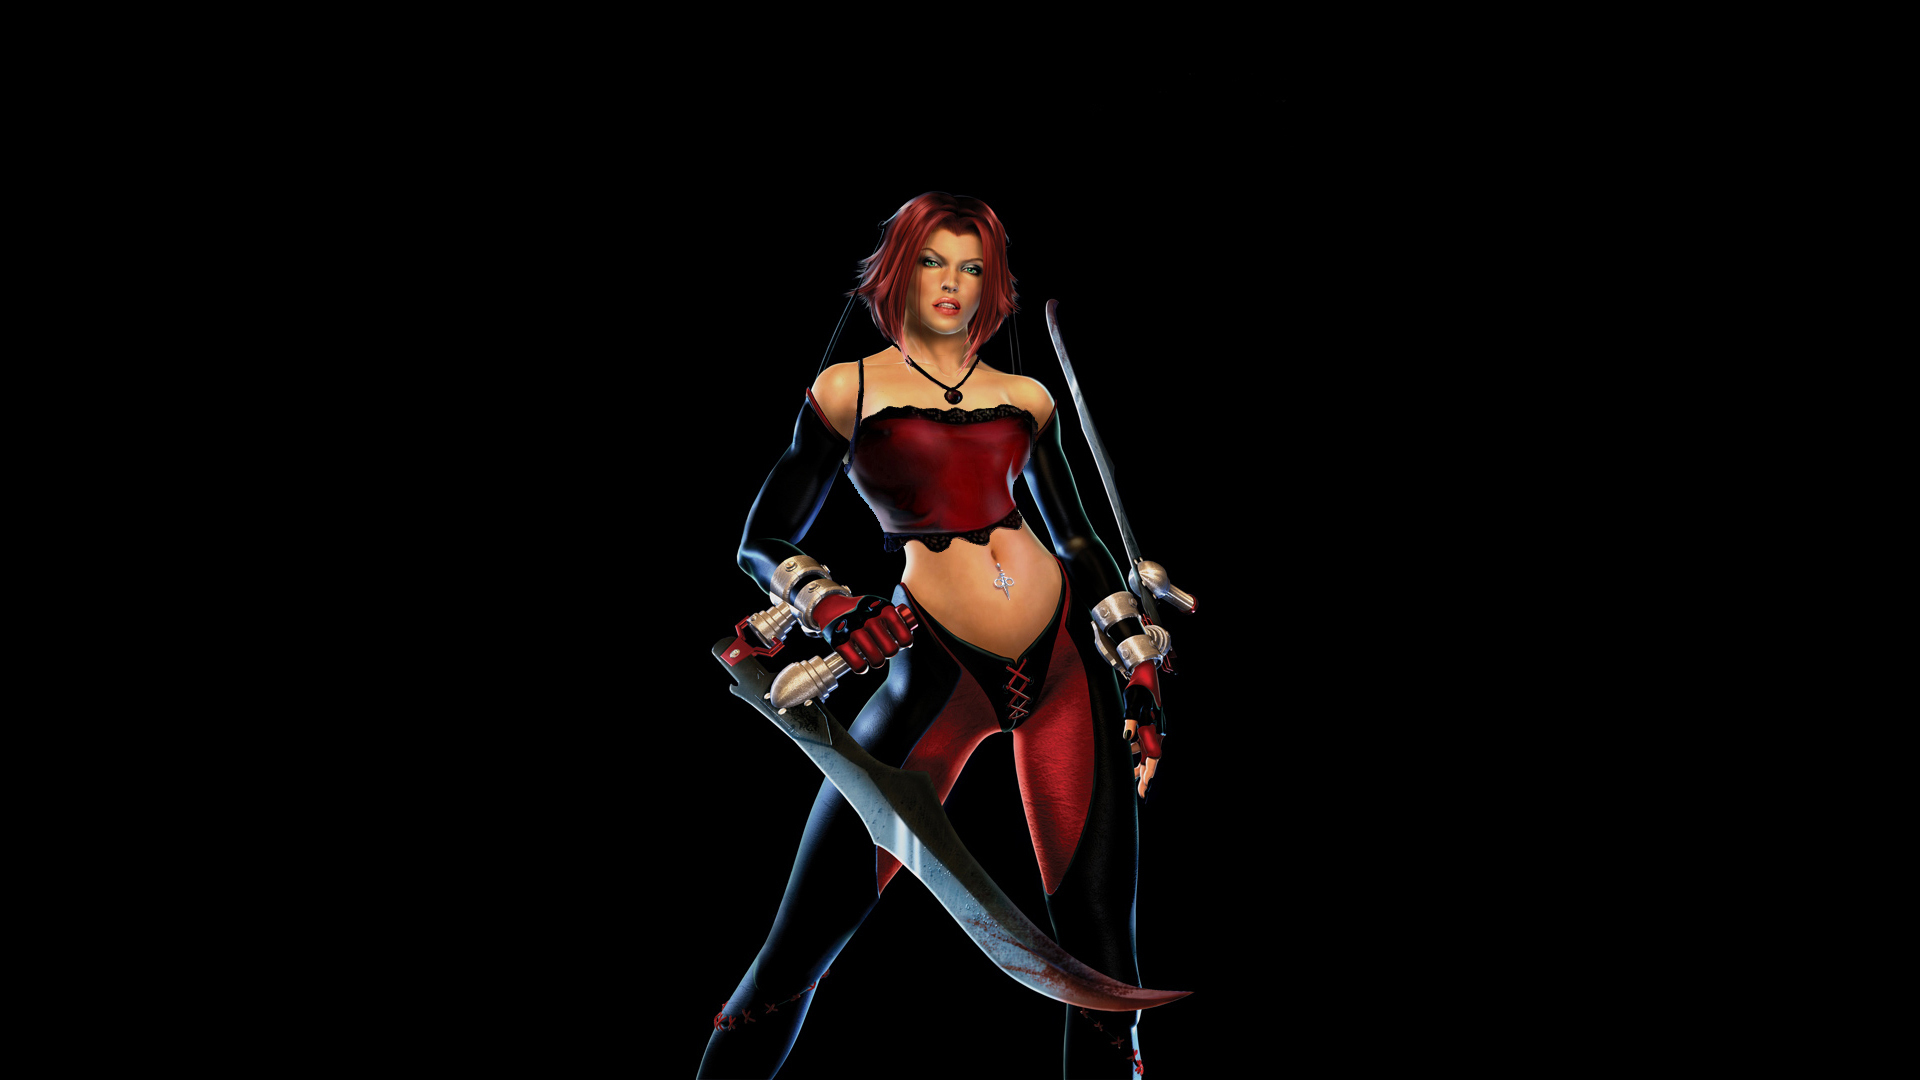 Oct 25, 2018 - wallpaper blink best of bloodrayne hd wallpapers hd for andr...